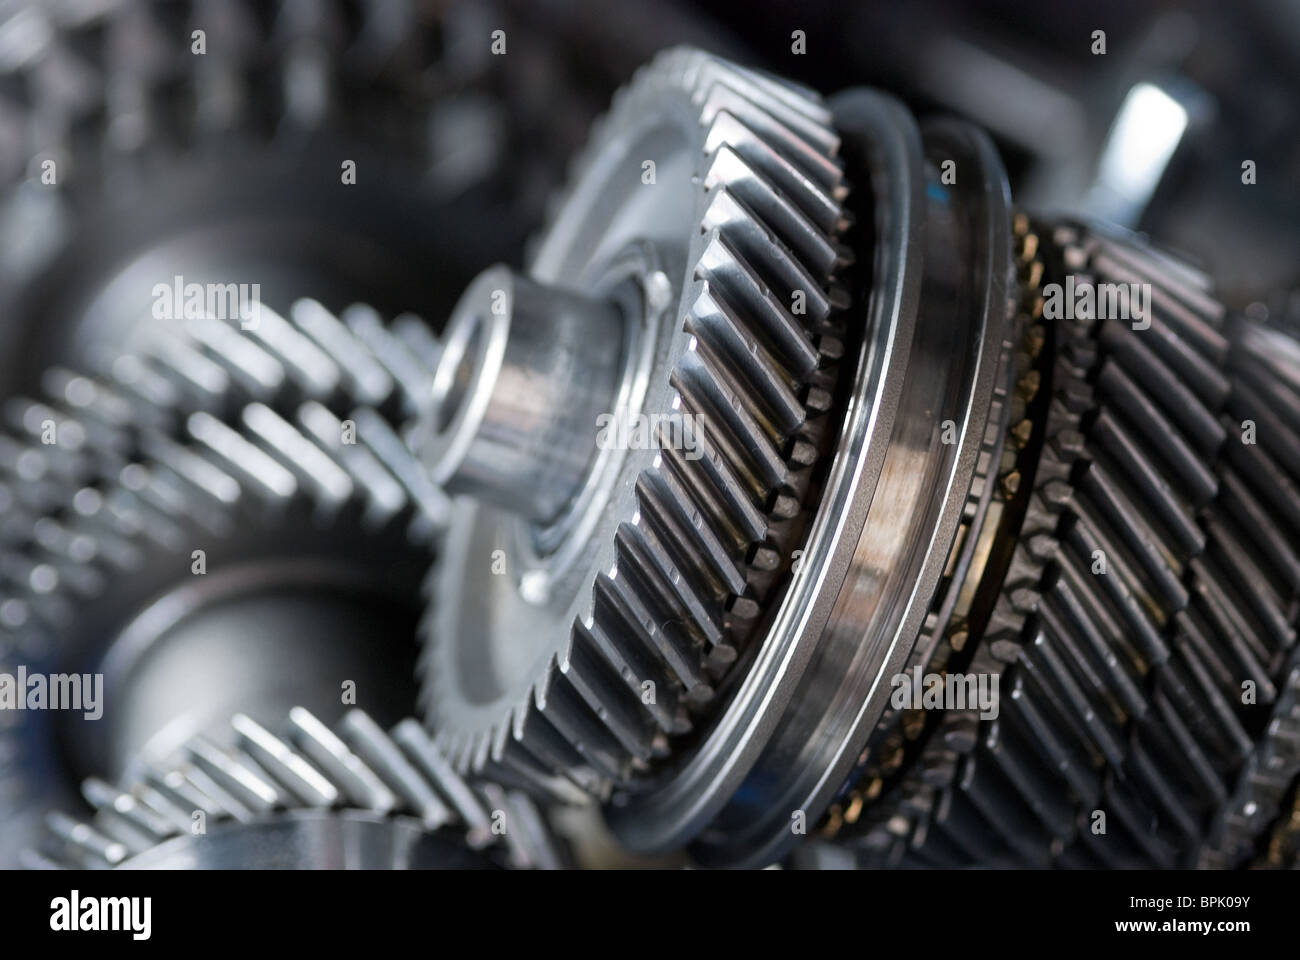 Parts from a vehicle gearbox. Shallow depth of field with the nearest gear in focus. Stock Photo